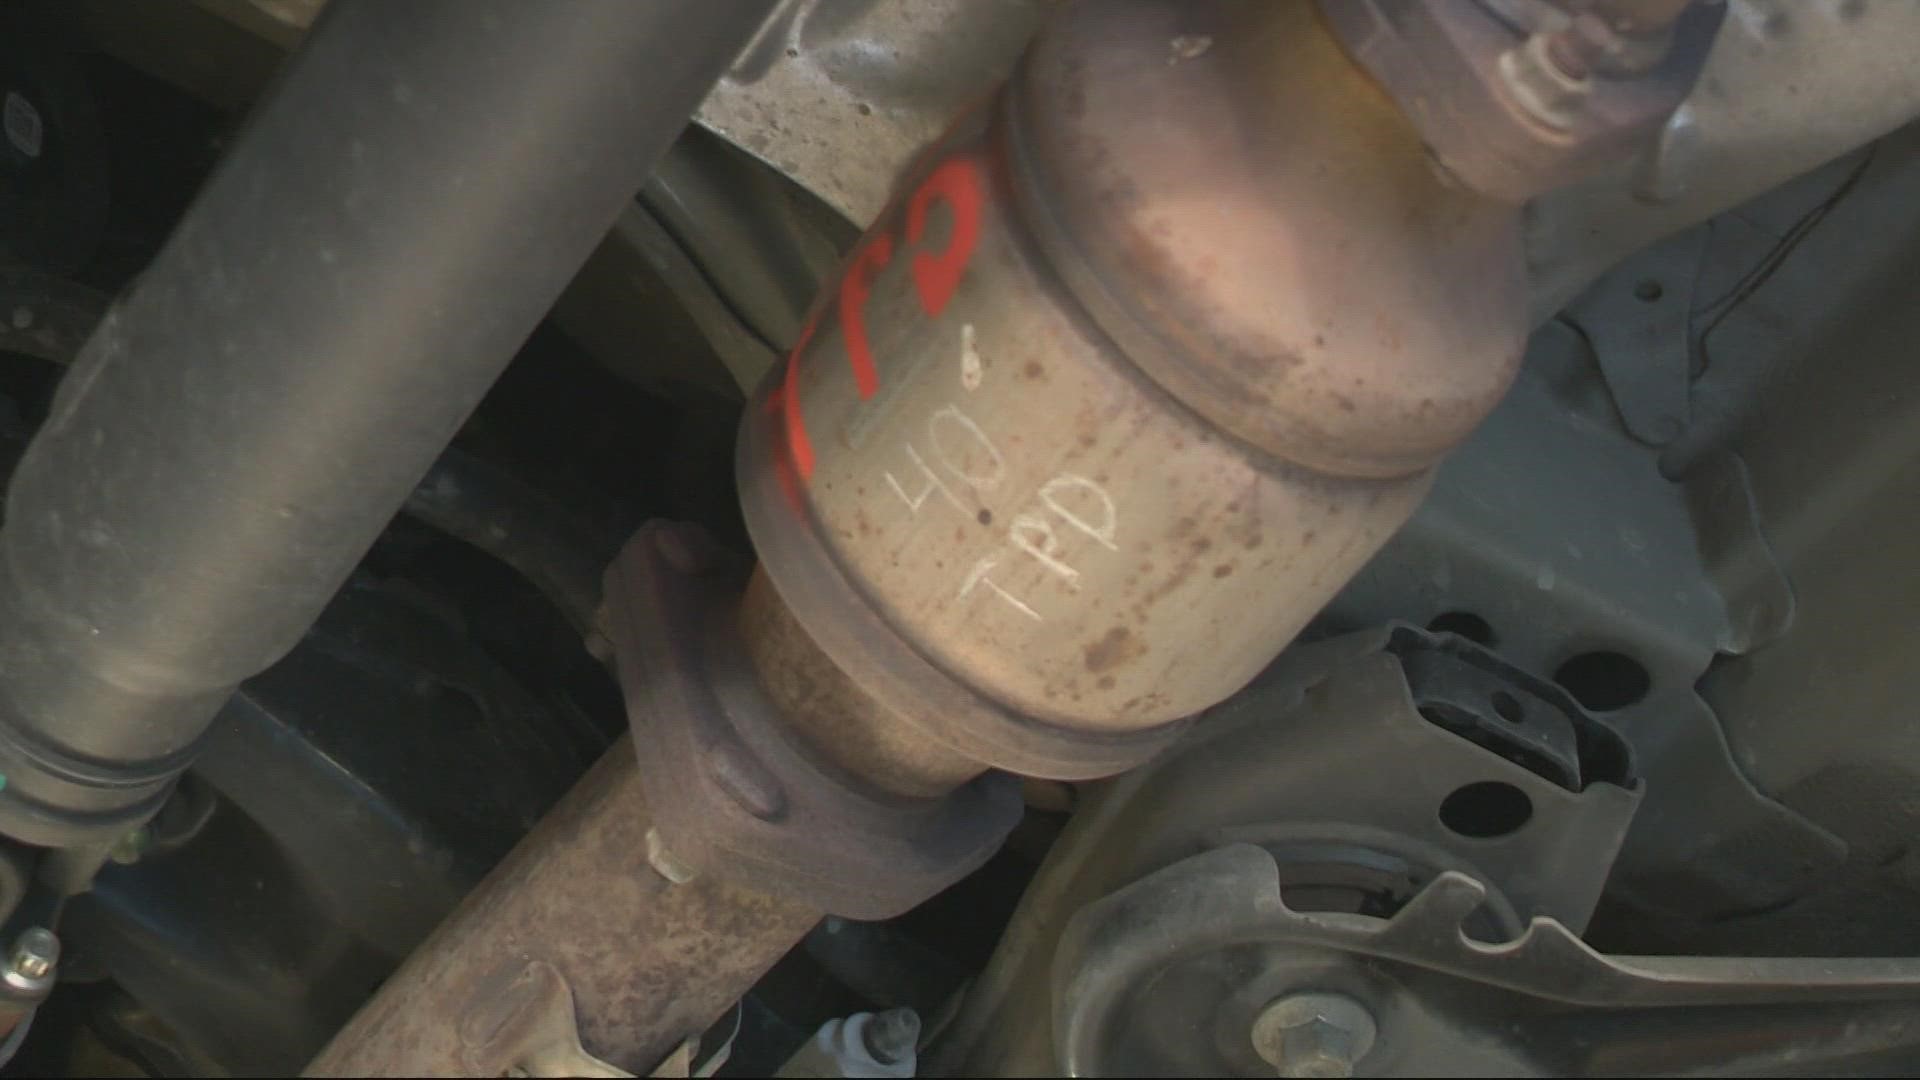 On Oct. 8, the Tigard Police Department partnered with a local car repair shop to mark people’s catalytic converters to make them less appealing to thieves.